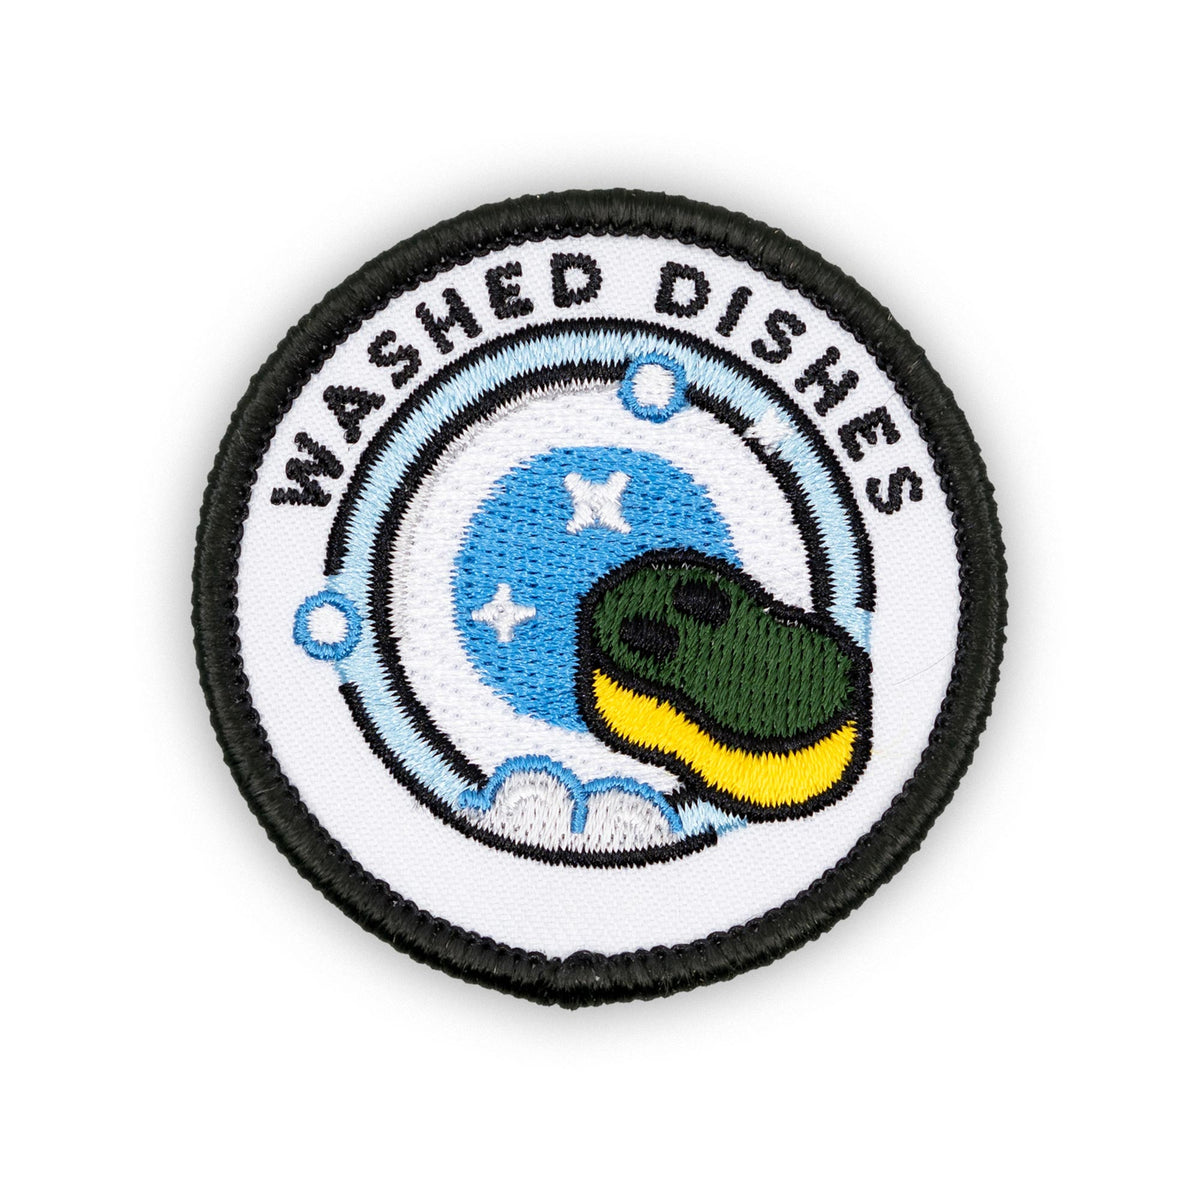 Washed The Dished individual adulting merit badge patch for adults